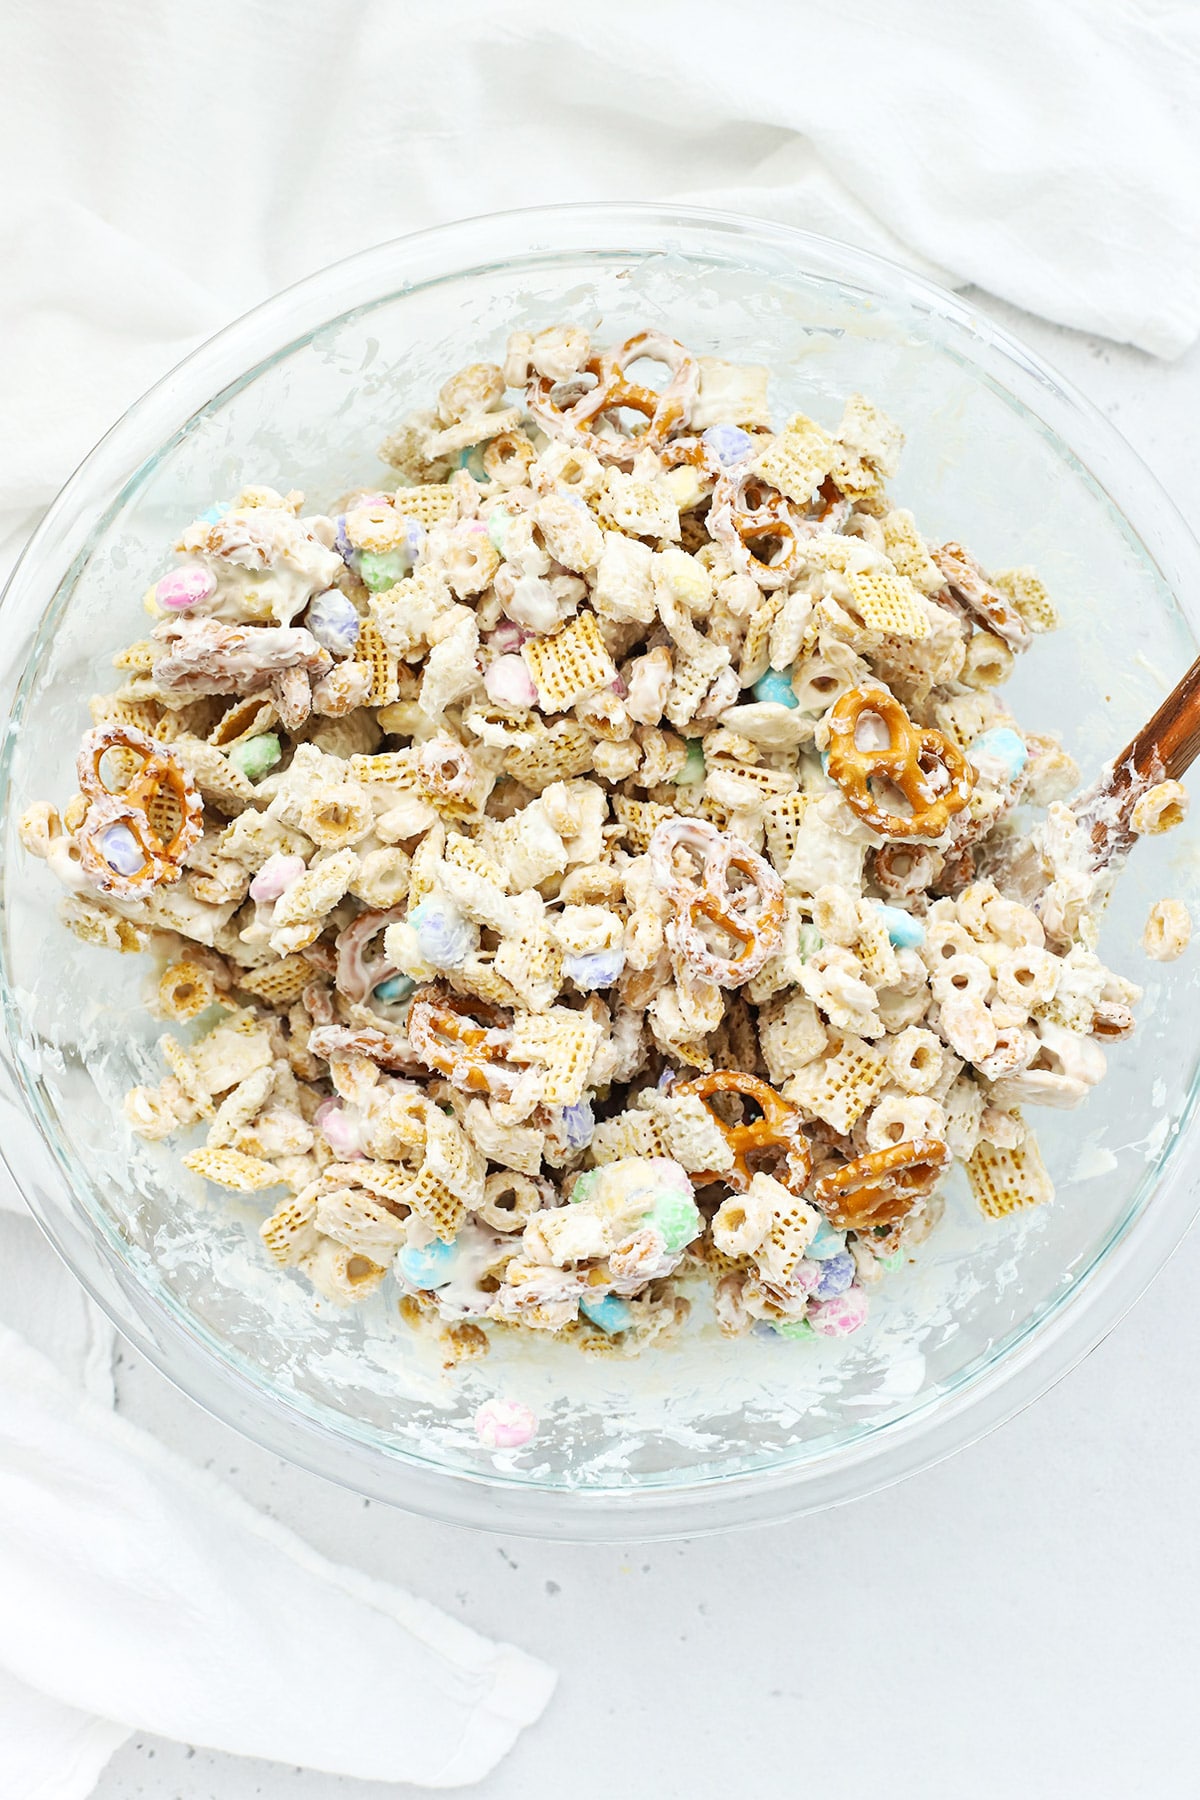 Mixing white chocolate into gluten-free bunny bait chex mix